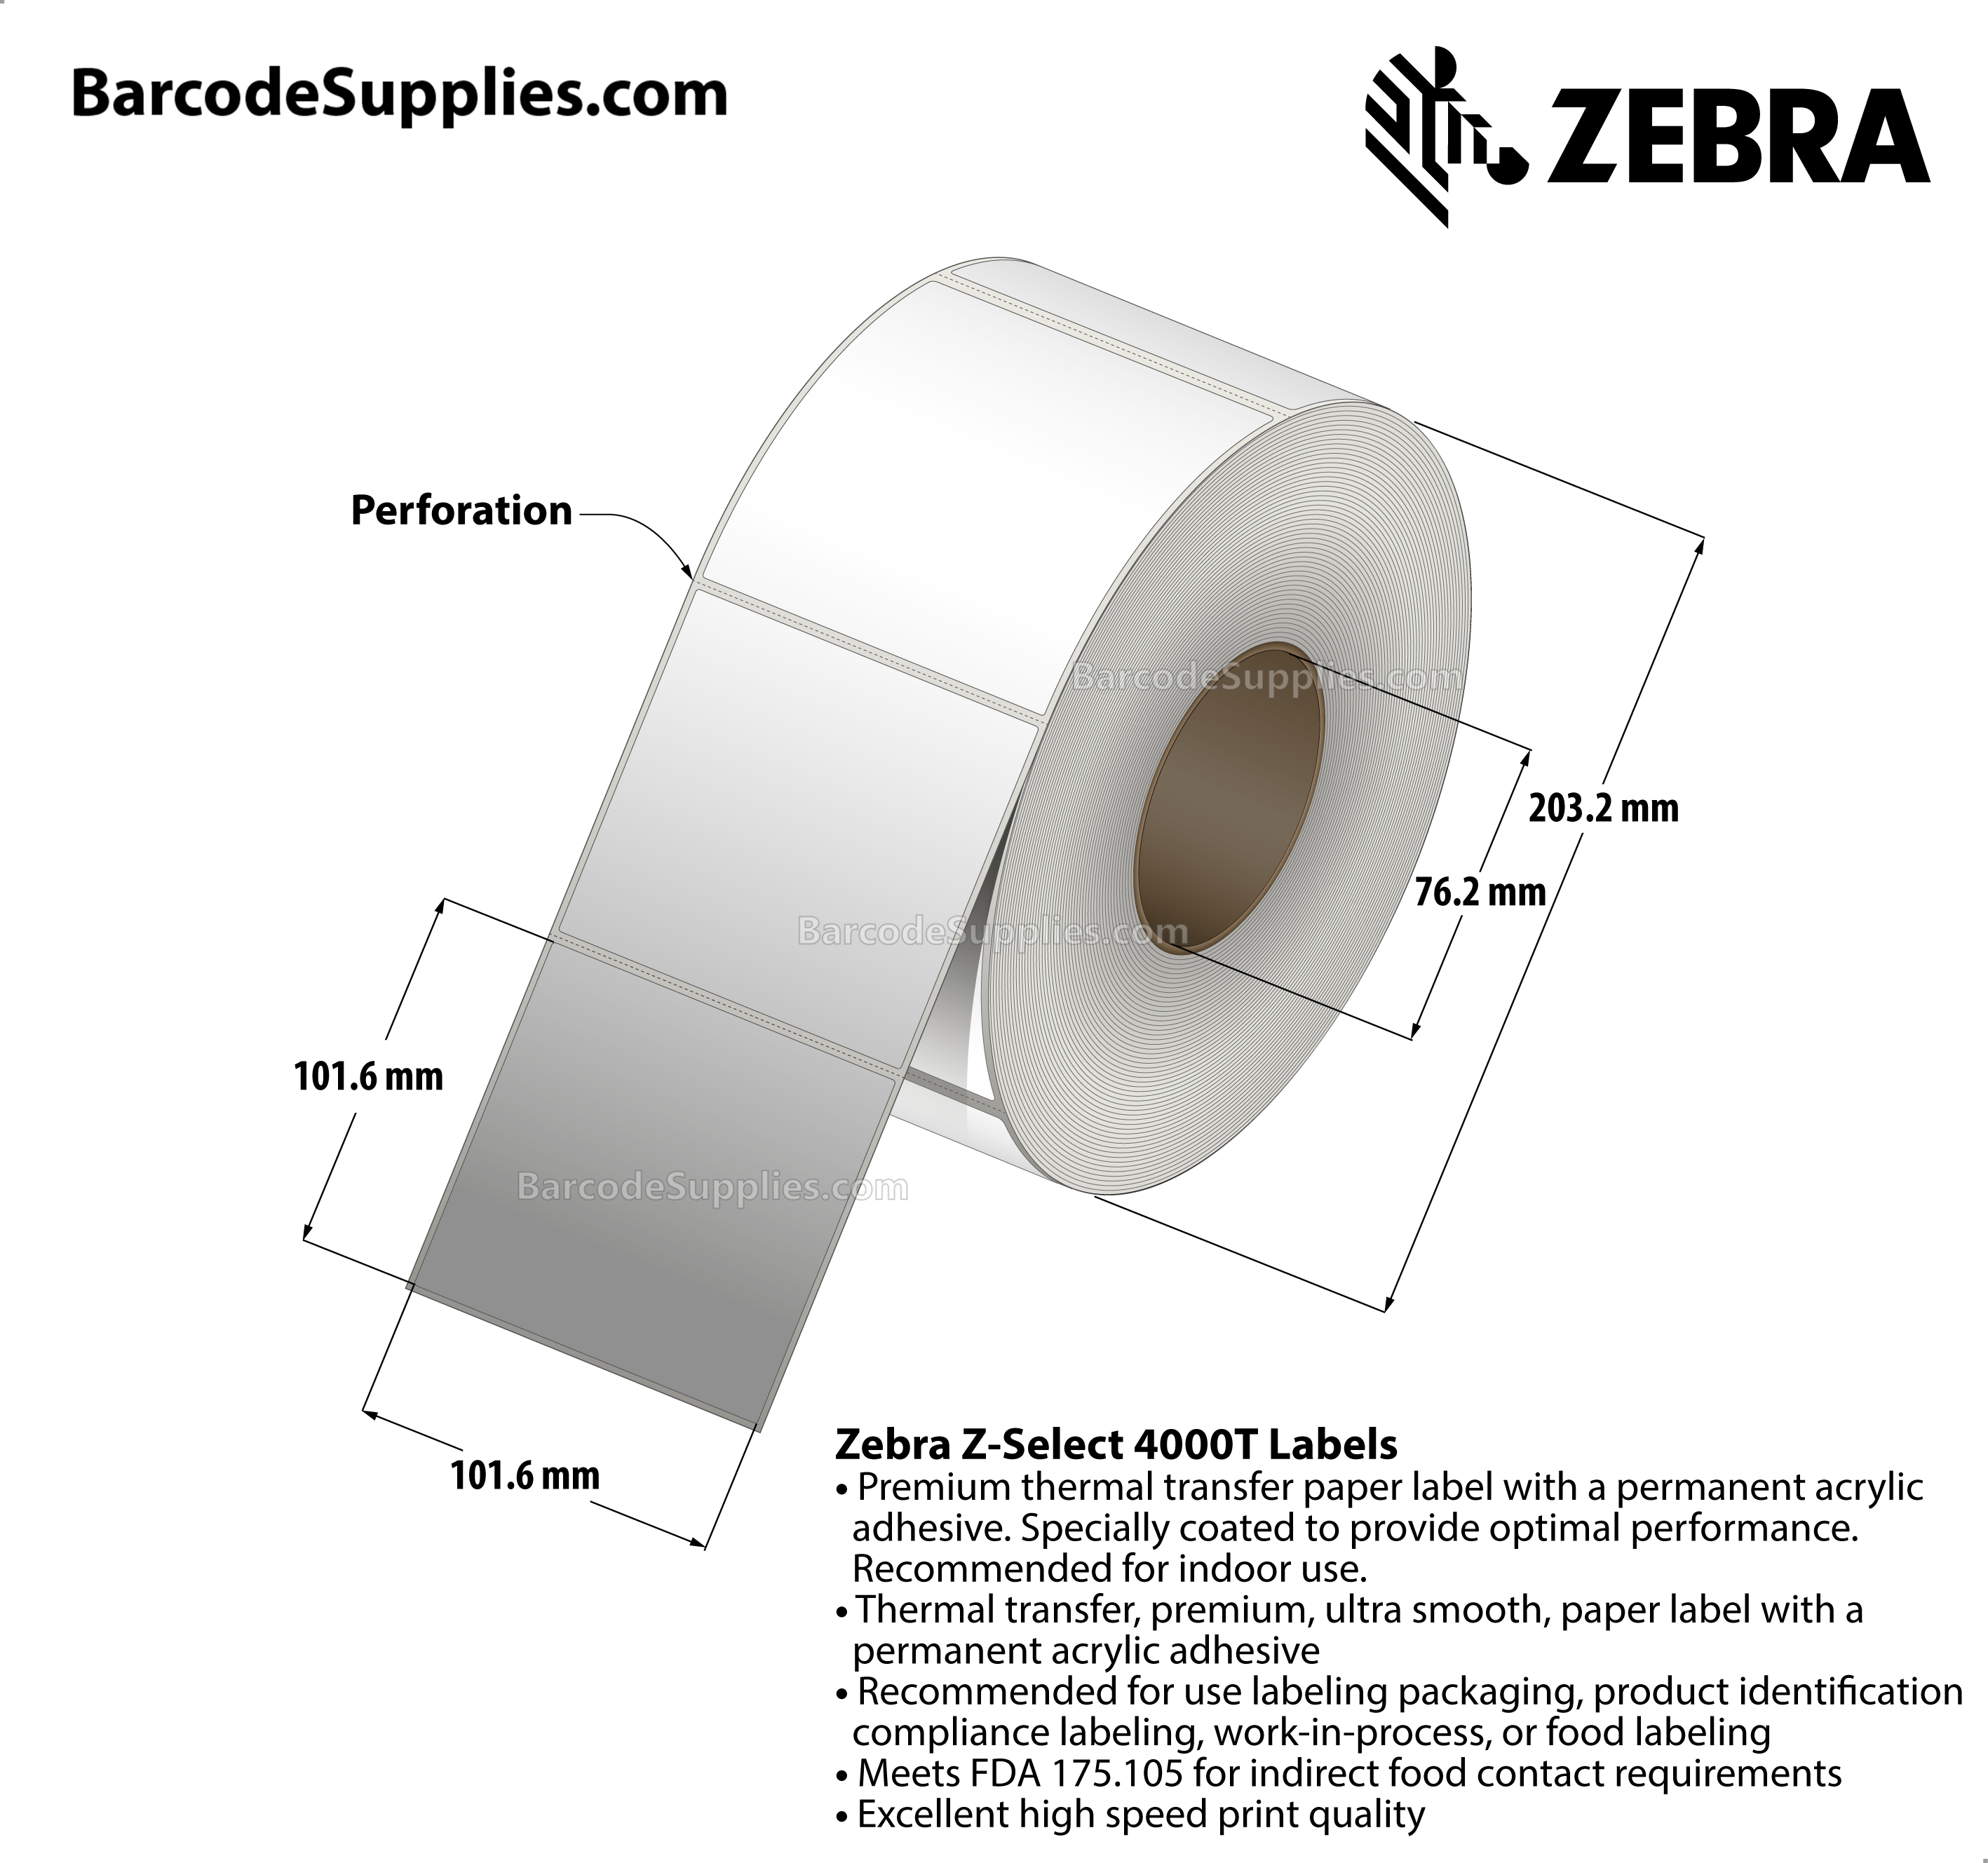 4 x 4 Thermal Transfer White Z-Select 4000T Labels With Permanent Adhesive - Perforated - 1696 Labels Per Roll - Carton Of 4 Rolls - 6784 Labels Total - MPN: 800640-405